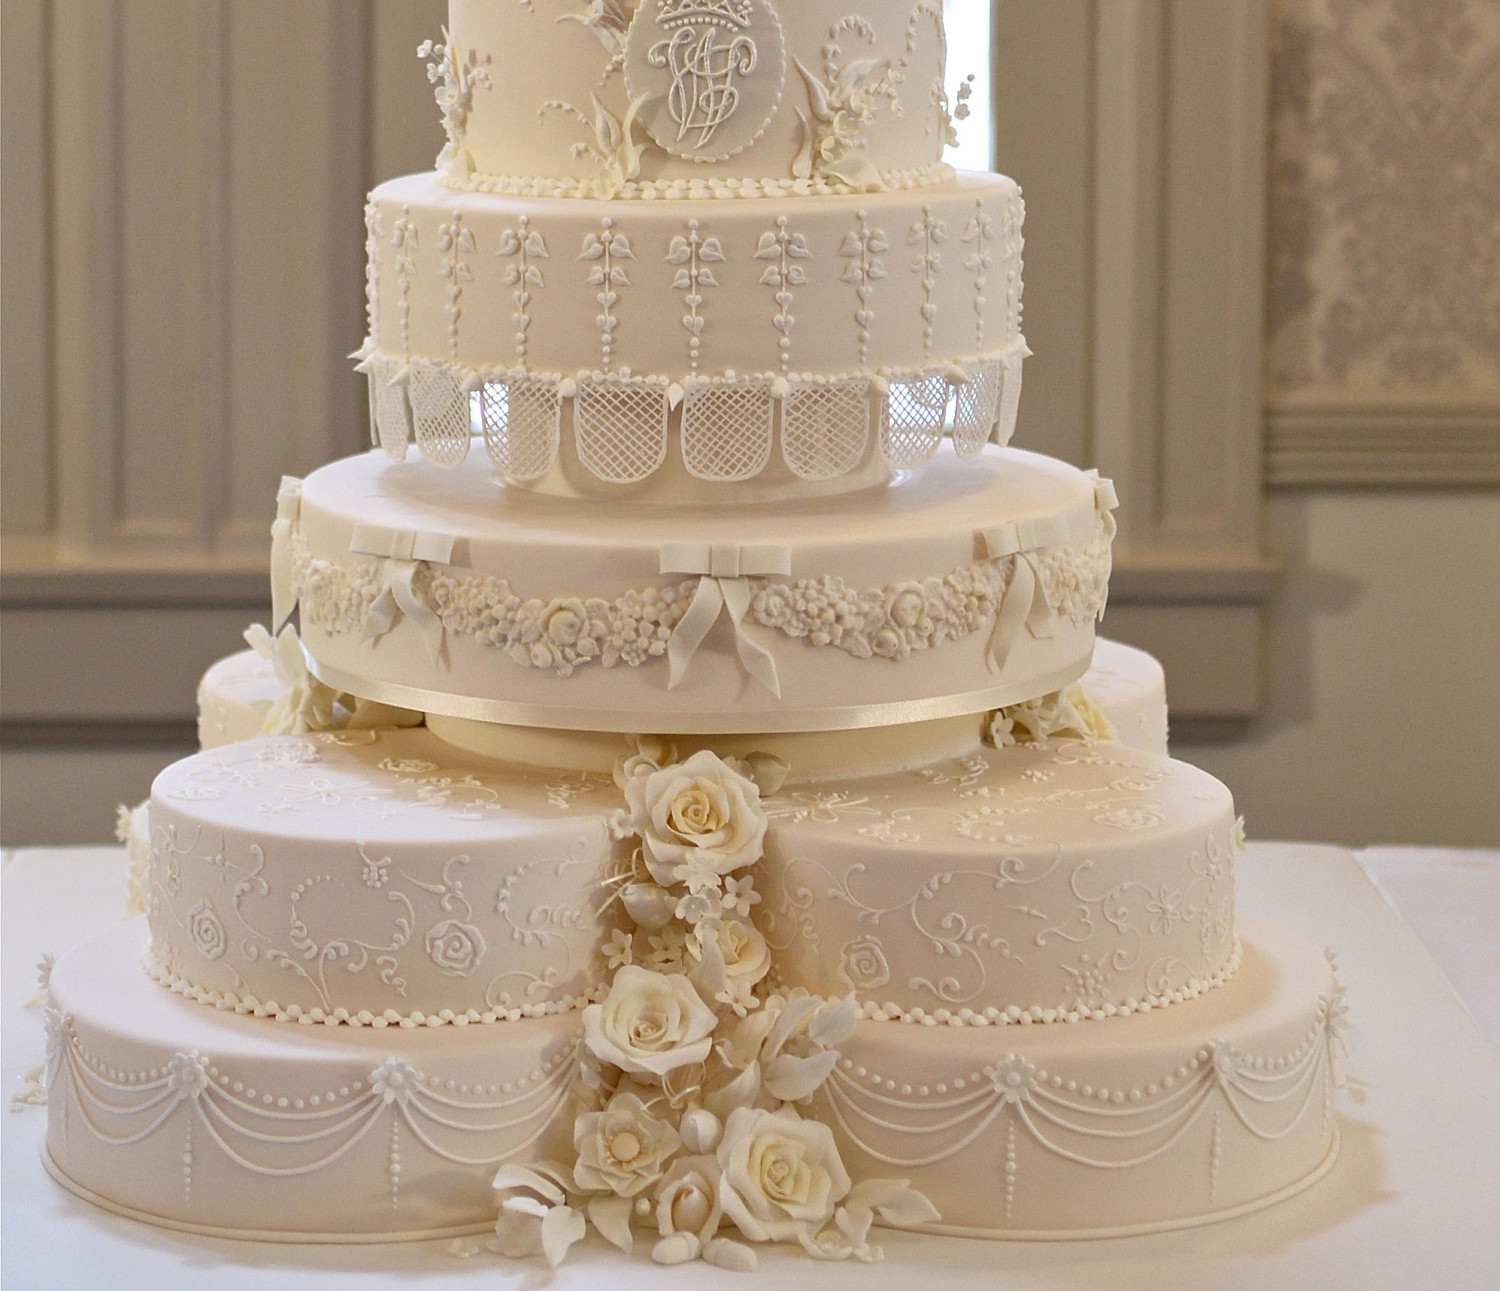 Wedding Cakes Tampa
 Best Places For Wedding Cakes In Tampa Bay CBS Tampa